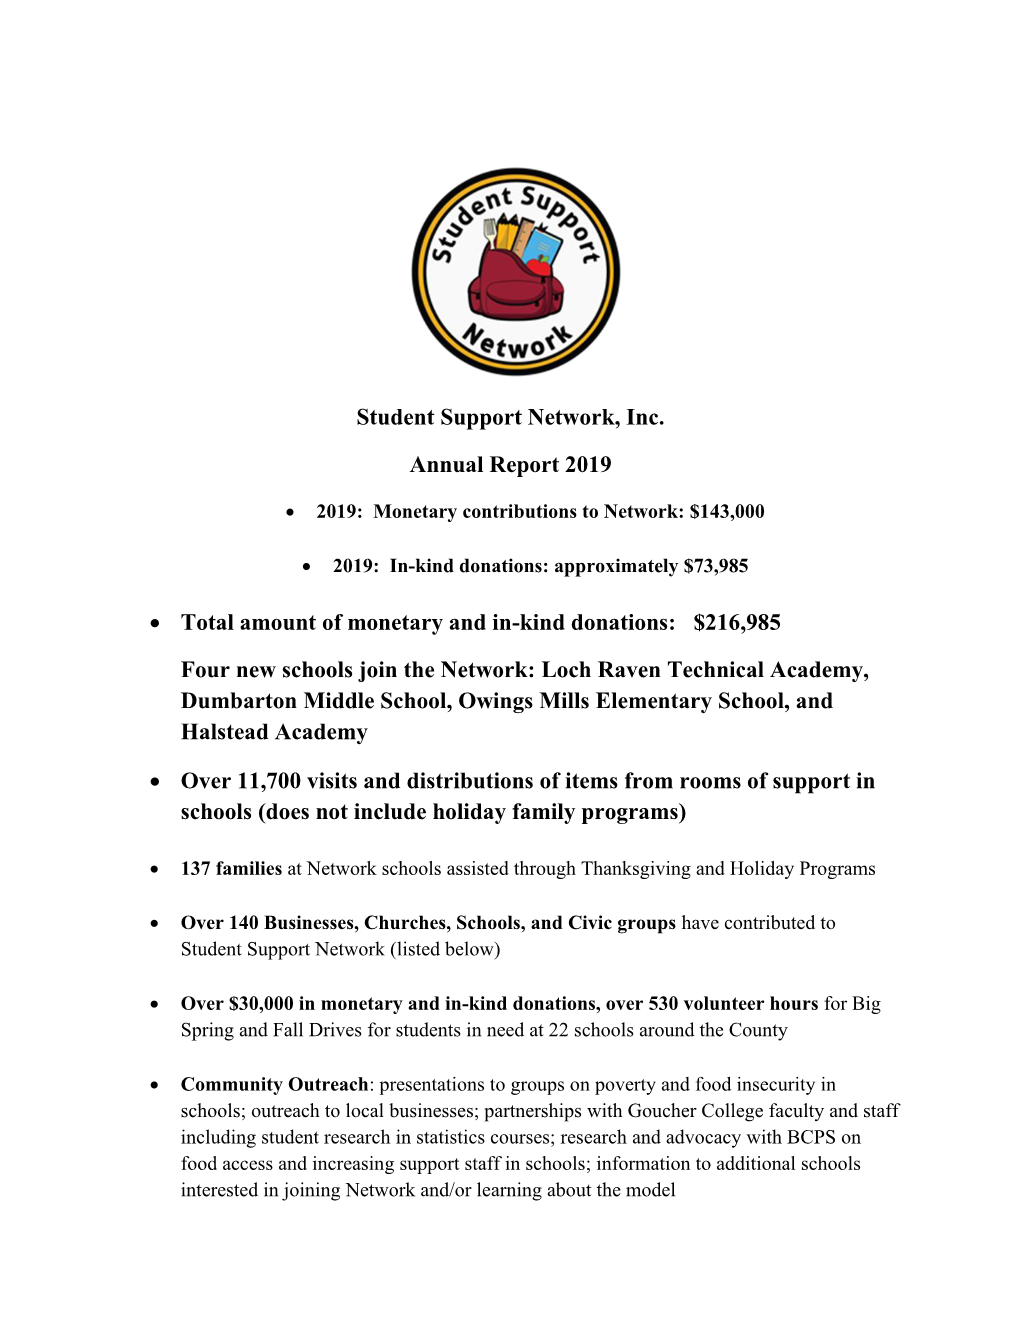 Student Support Network, Inc. Annual Report 2019 • Total Amount Of